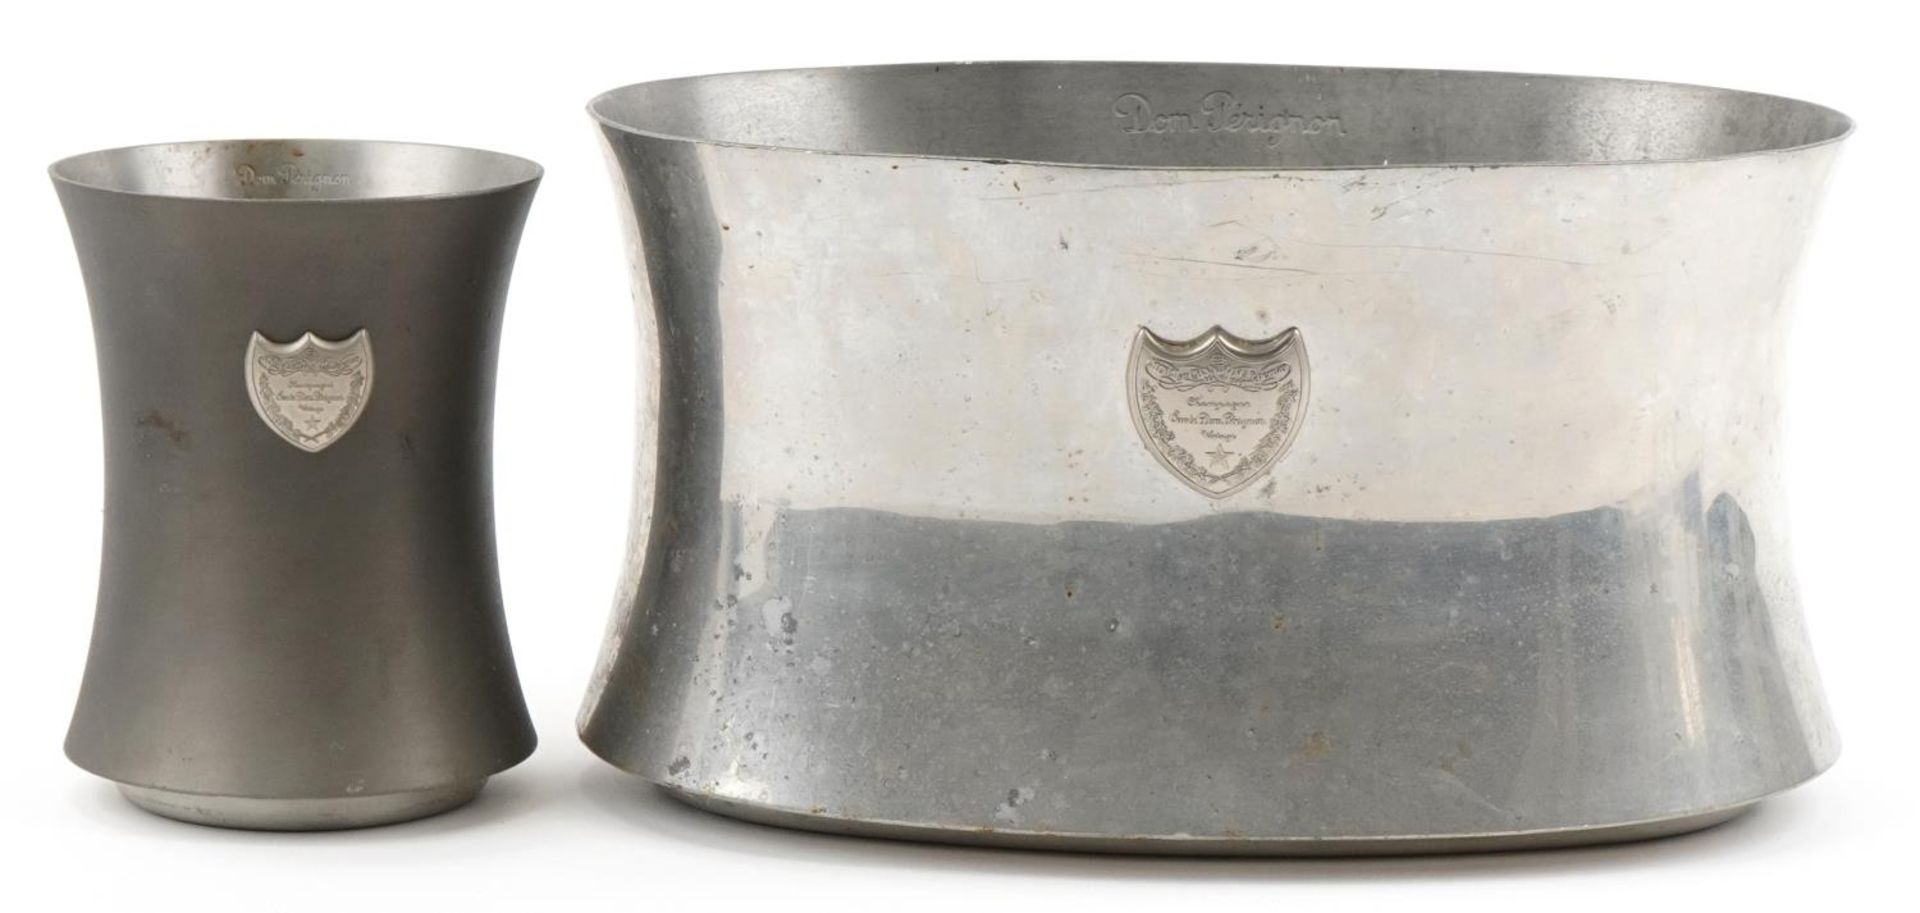 Two vintage French pewter Dom Perignon ice buckets designed by Martin Szekely, the largest 39cm wide